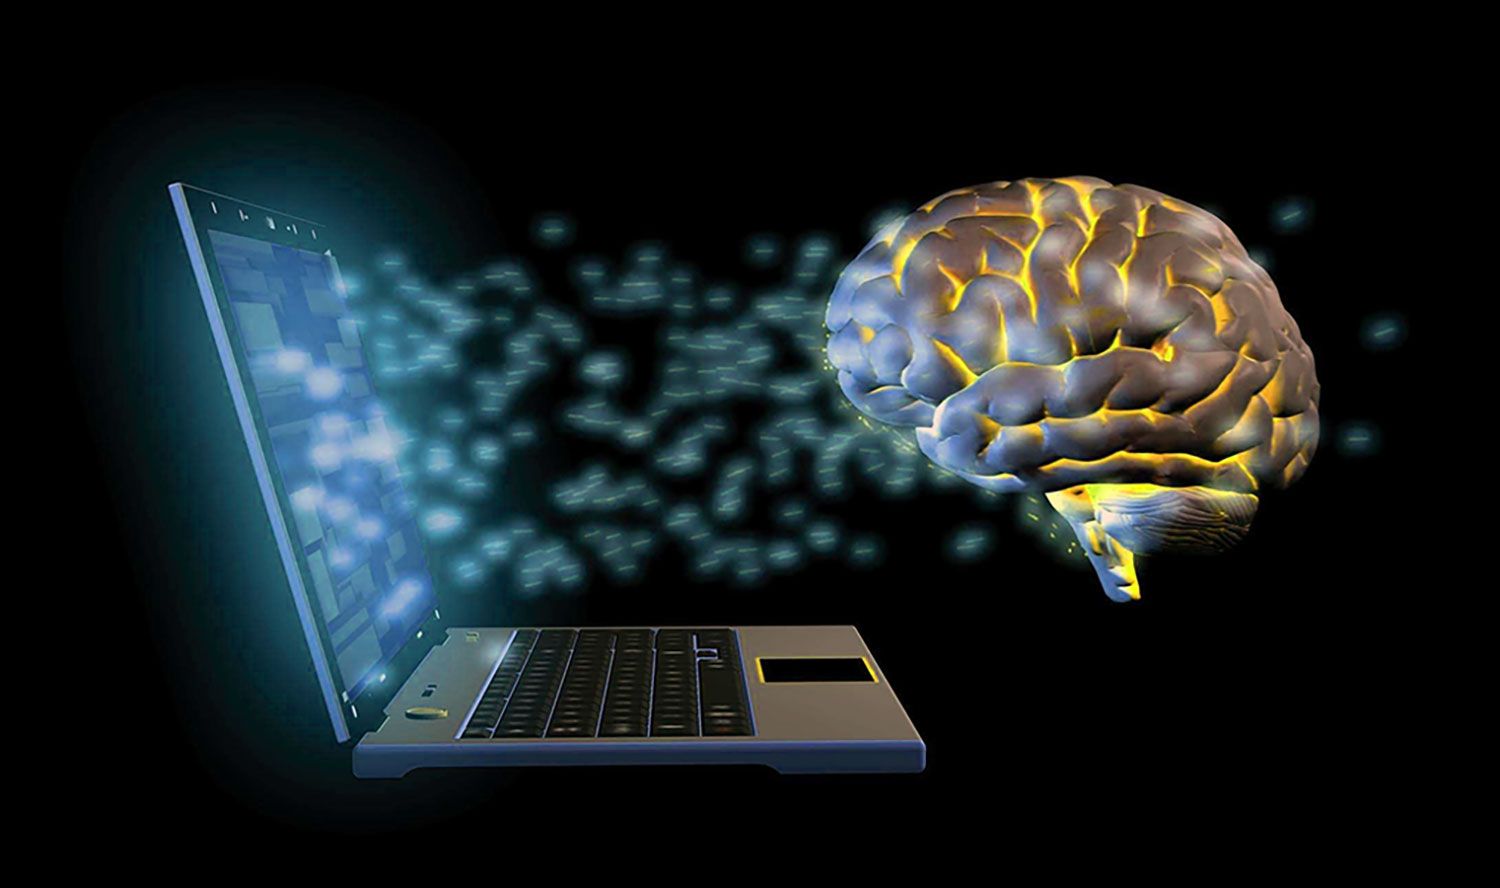 Revolutionary brain-computer interface offers hope to